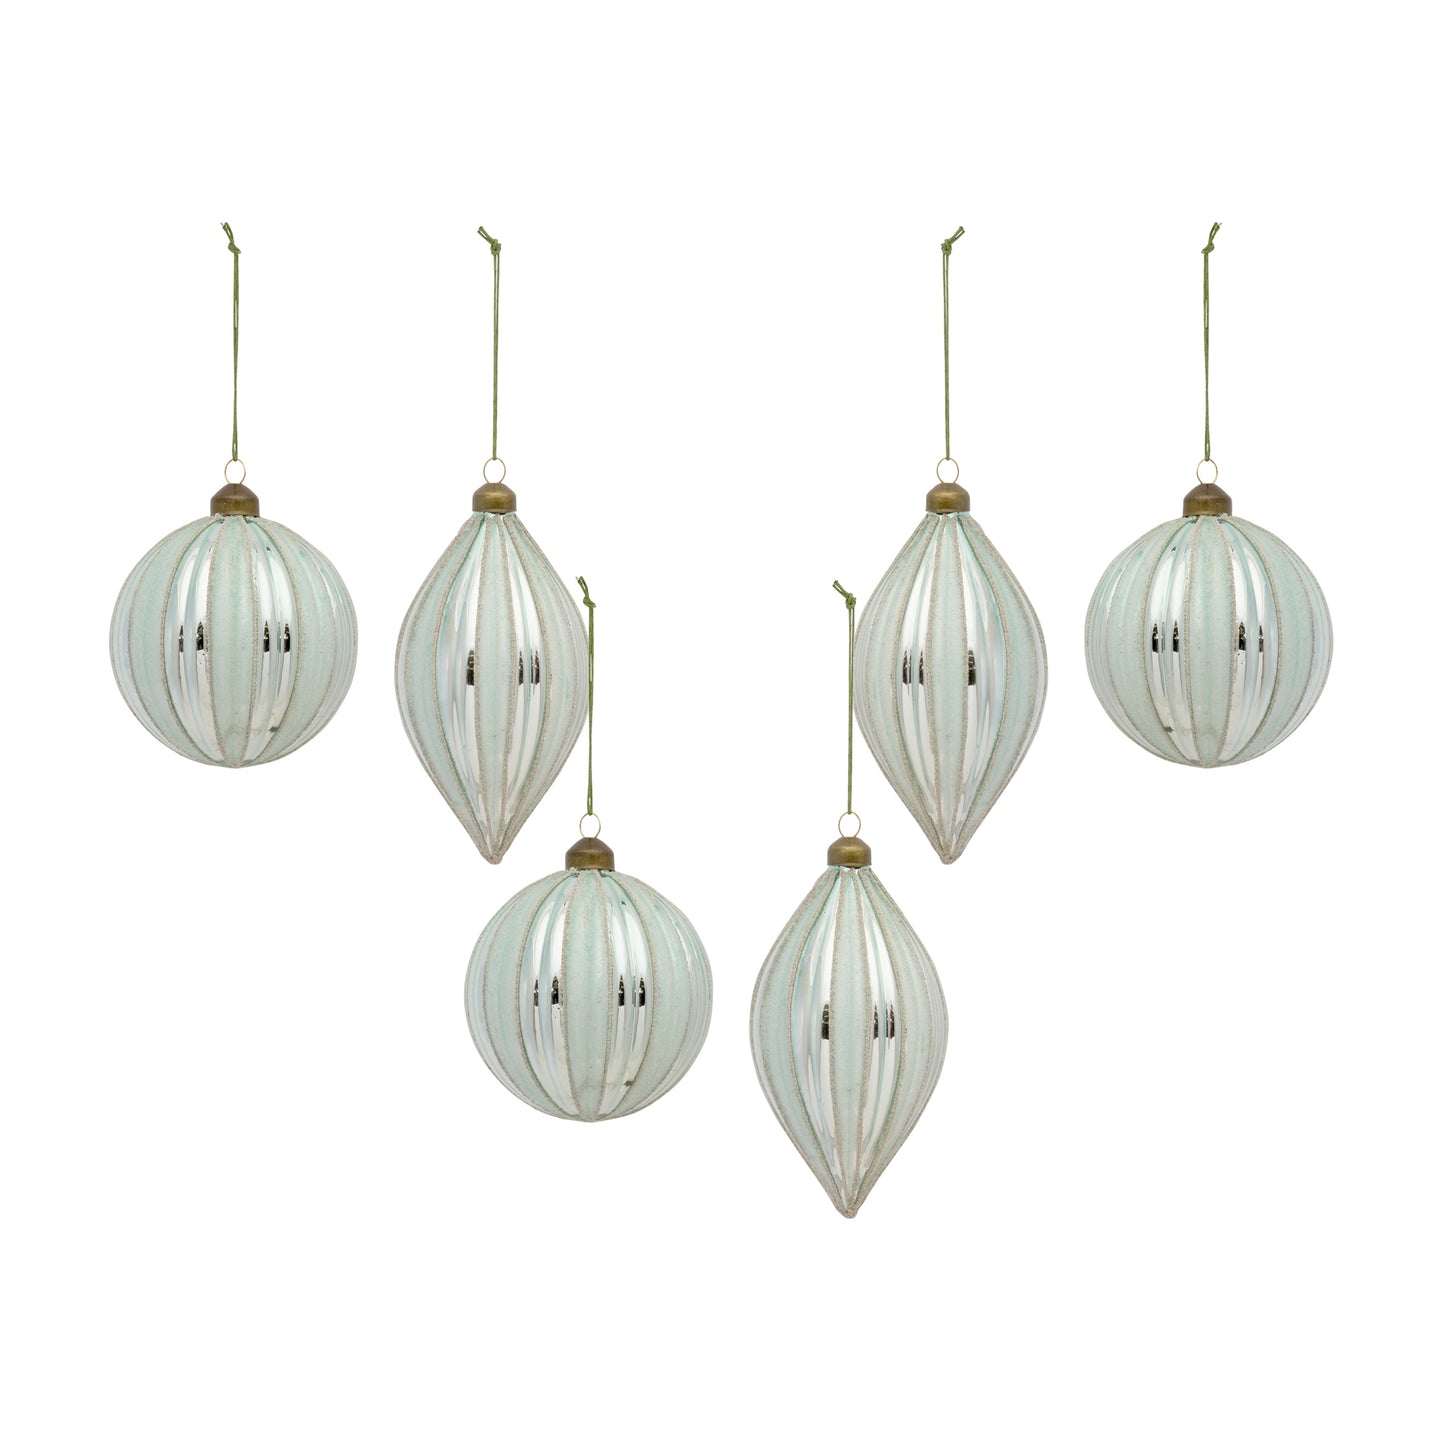 Seafoam Blue Glass Ornament with Silver Accent (Set of 6)